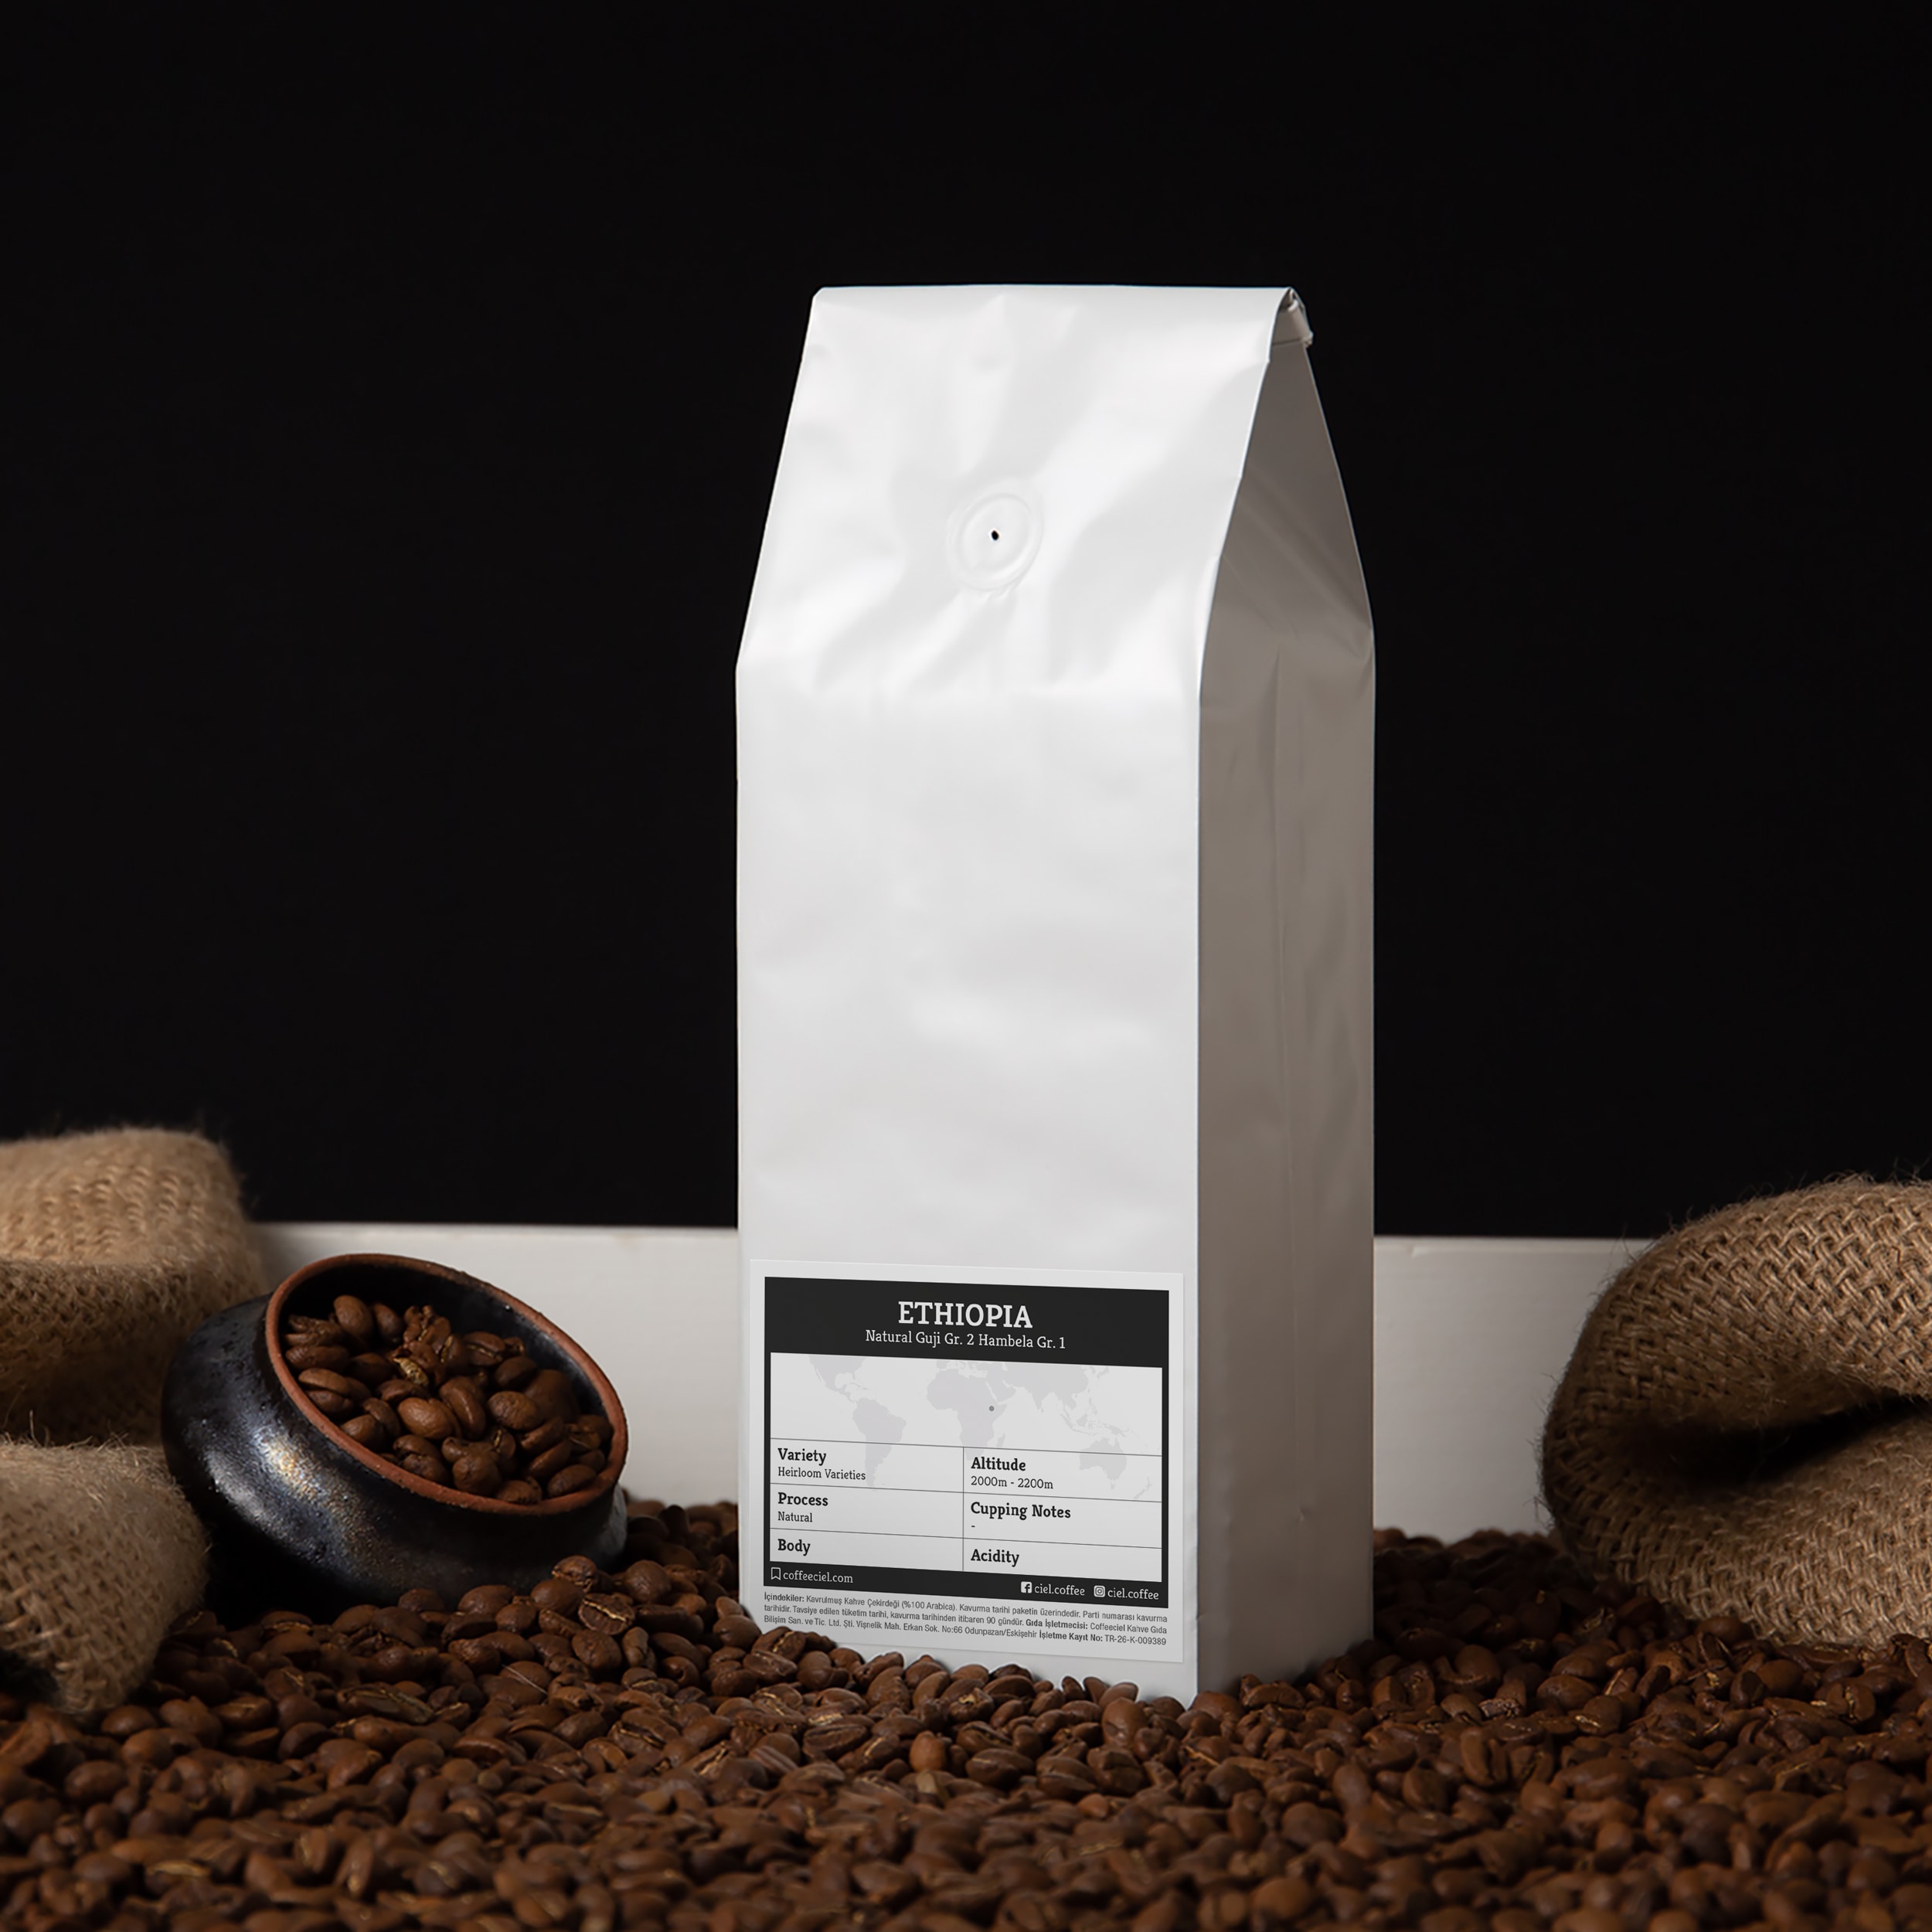 Featured image for “ETHIOPIA Sidamo Gr. 4”